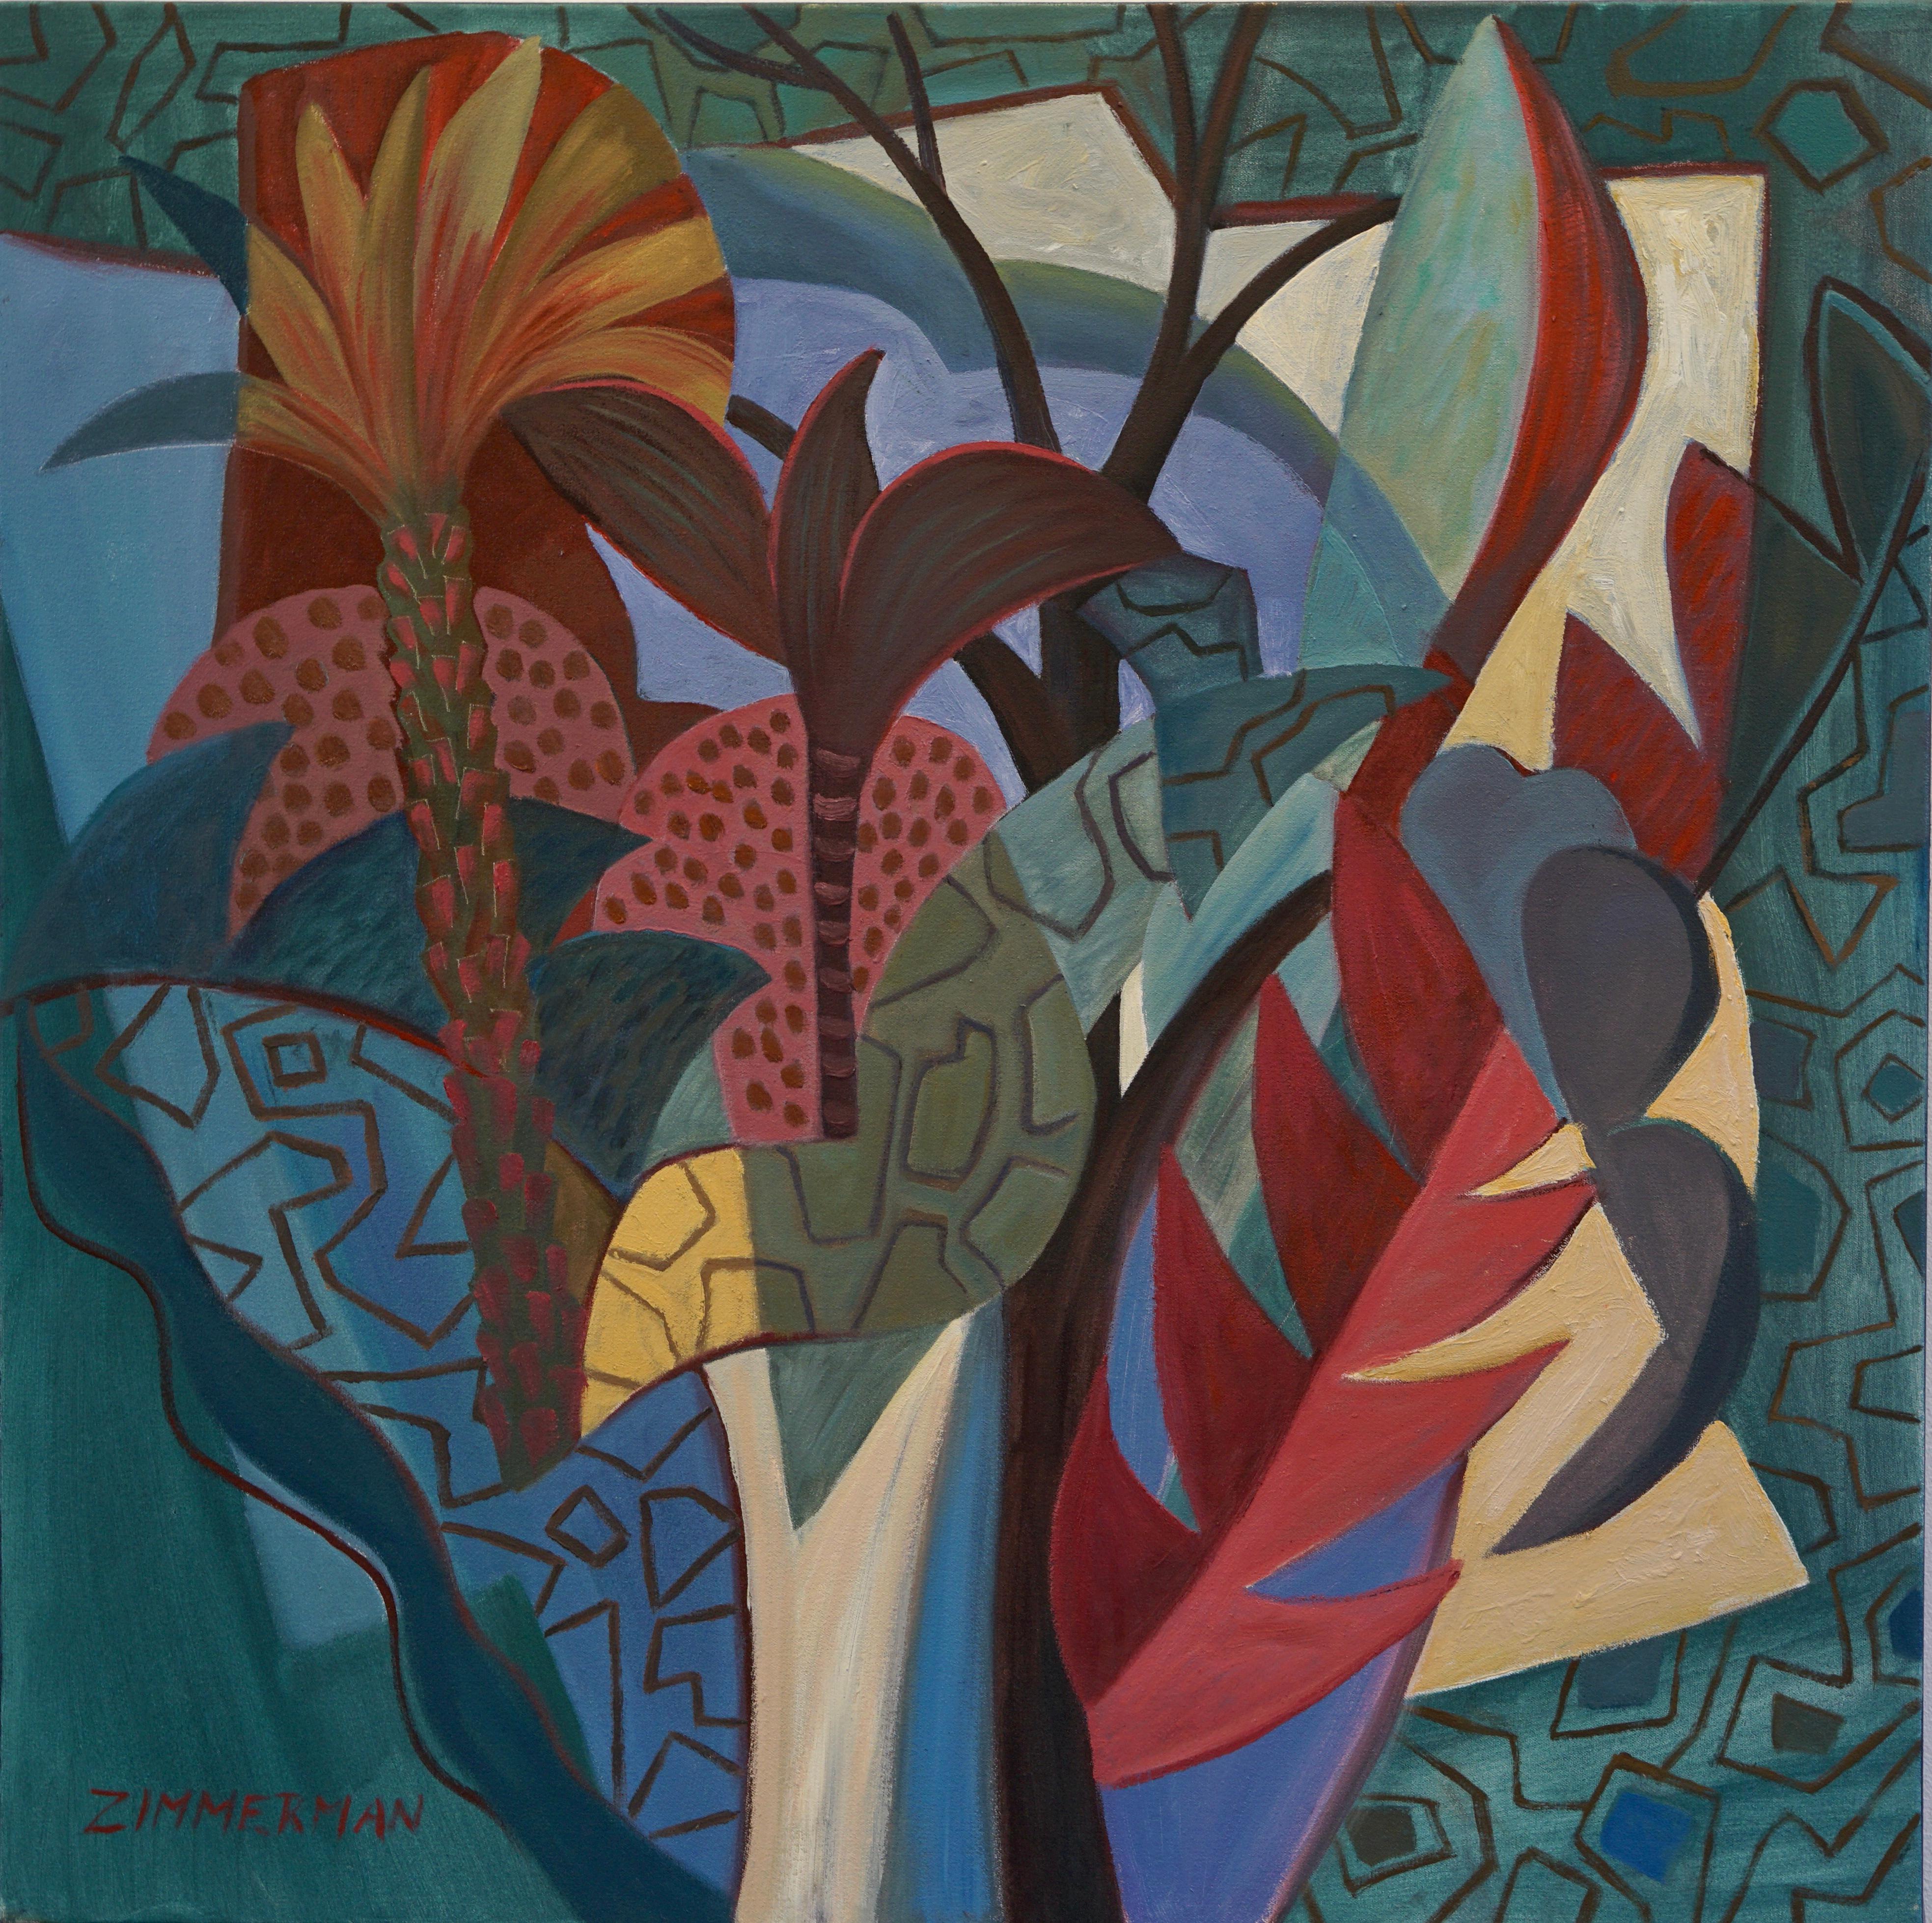  An intuitive simplification and synthesis of the artists endeavors with jungle imagery. Pattern and color prevail over a previously realistic approach. 

Jungle Abstraction - Landscape Painting - Oil on Canvas By Marc Zimmerman

This masterpiece is